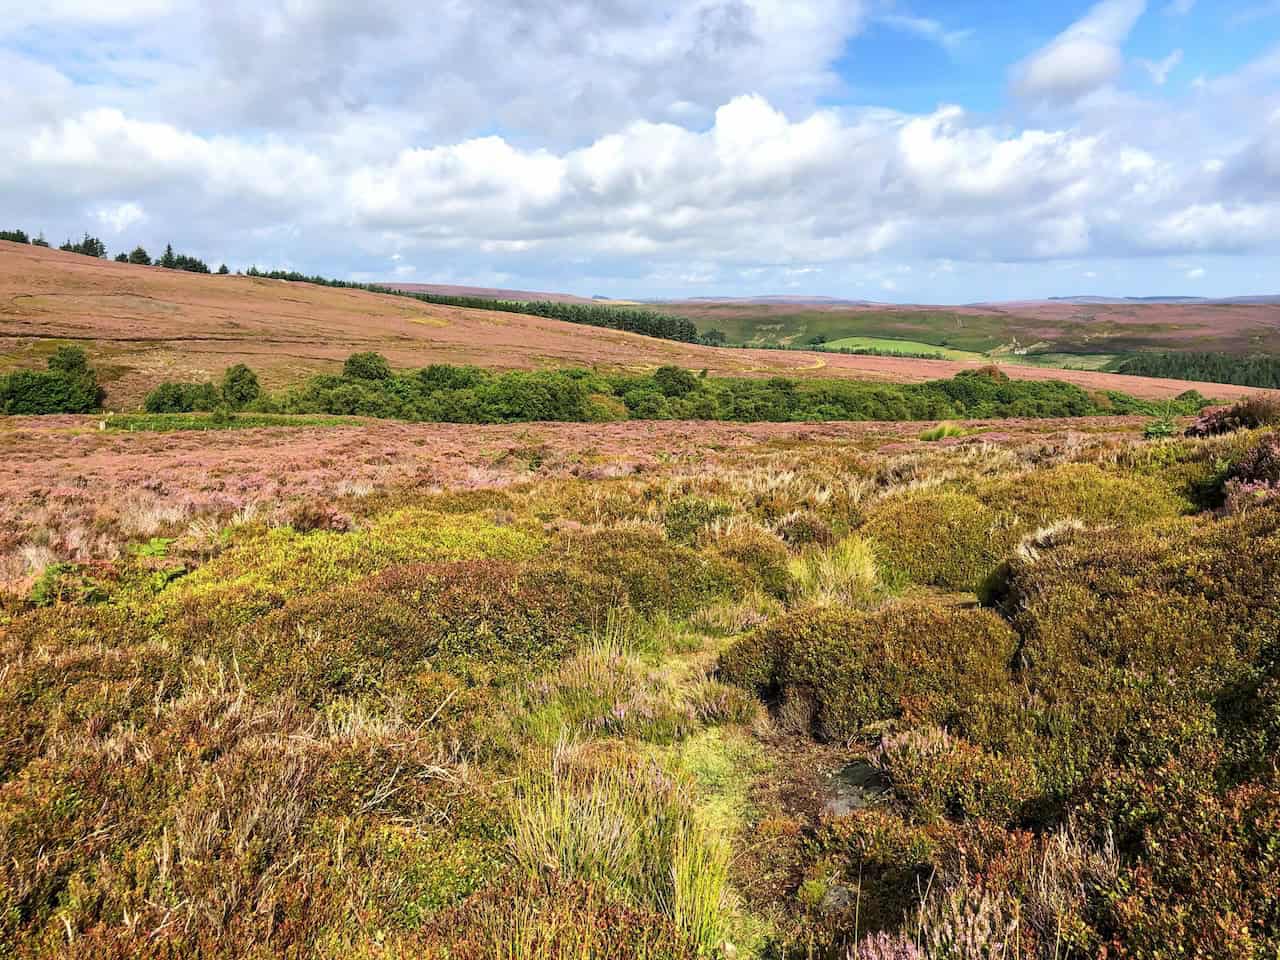 The beautiful colour combinations created by the moorlands, farmlands, and woodlands of the North York Moors are a visual treat.